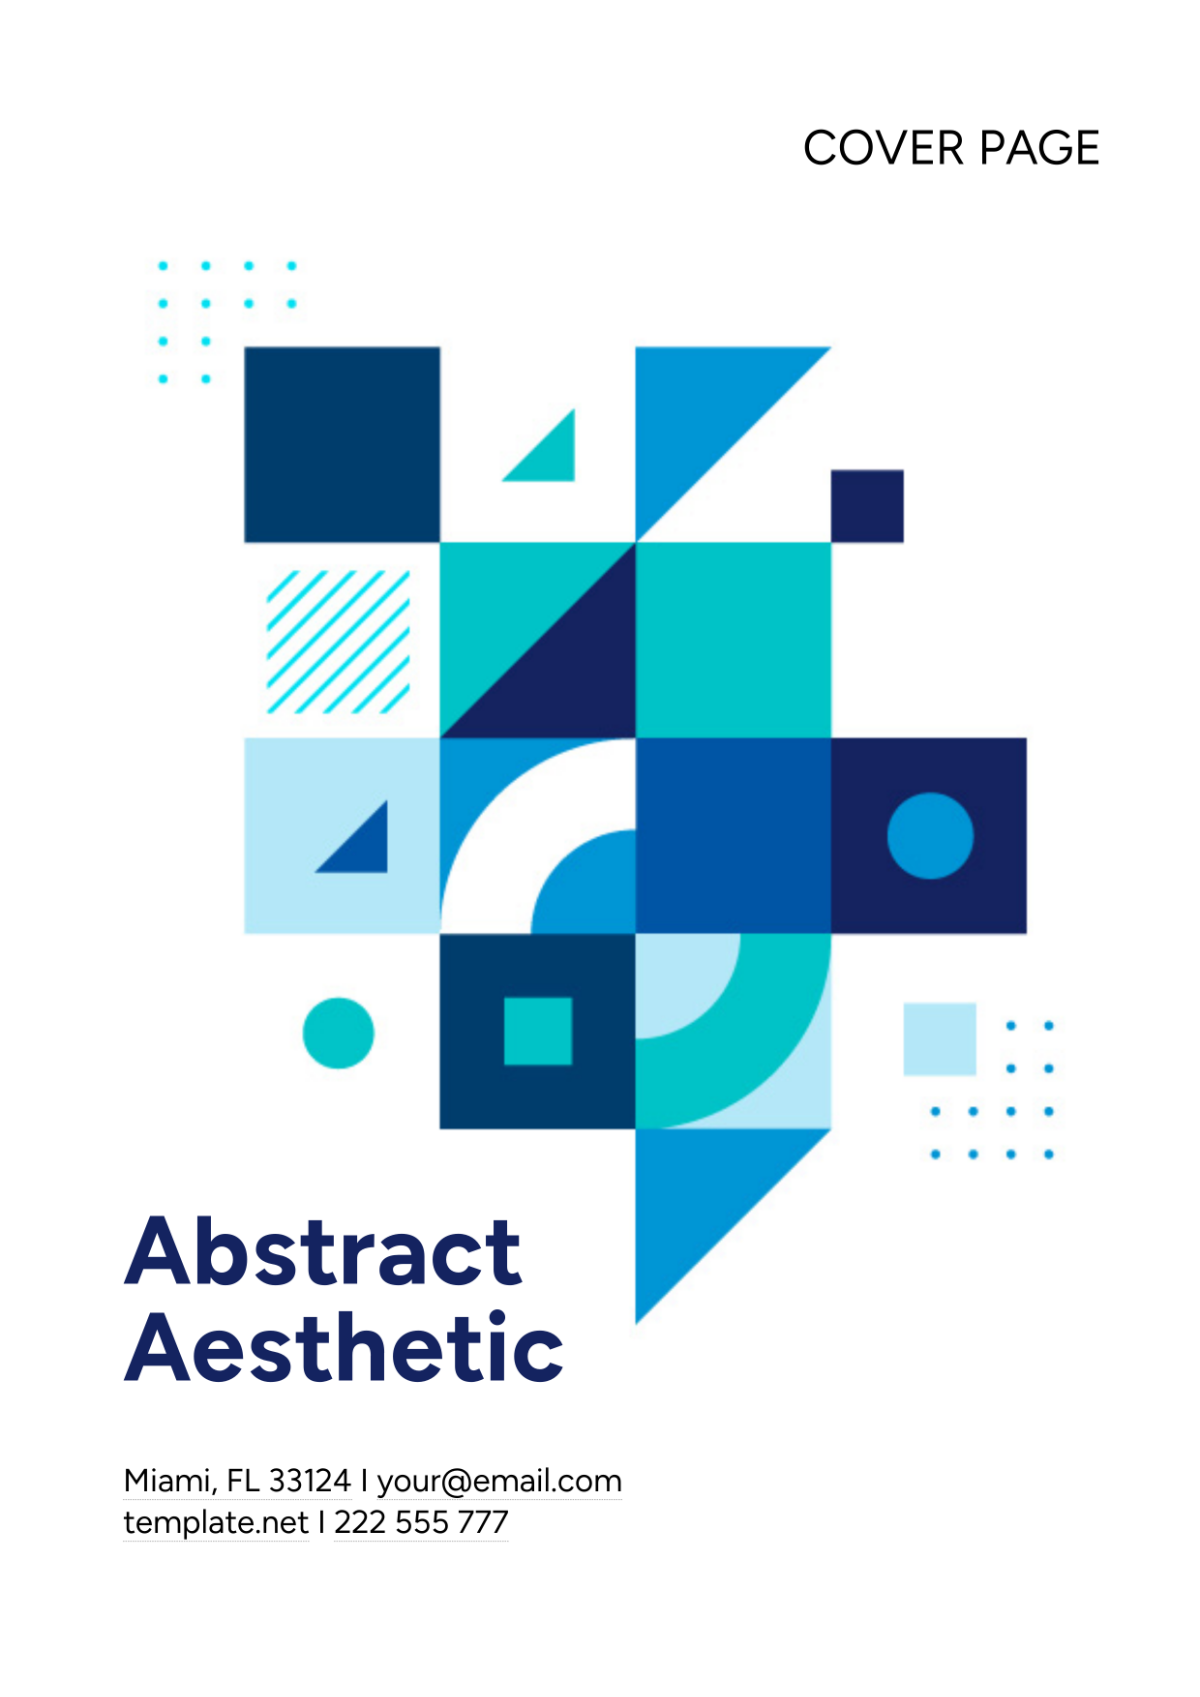 Abstract Aesthetic Cover Page Template